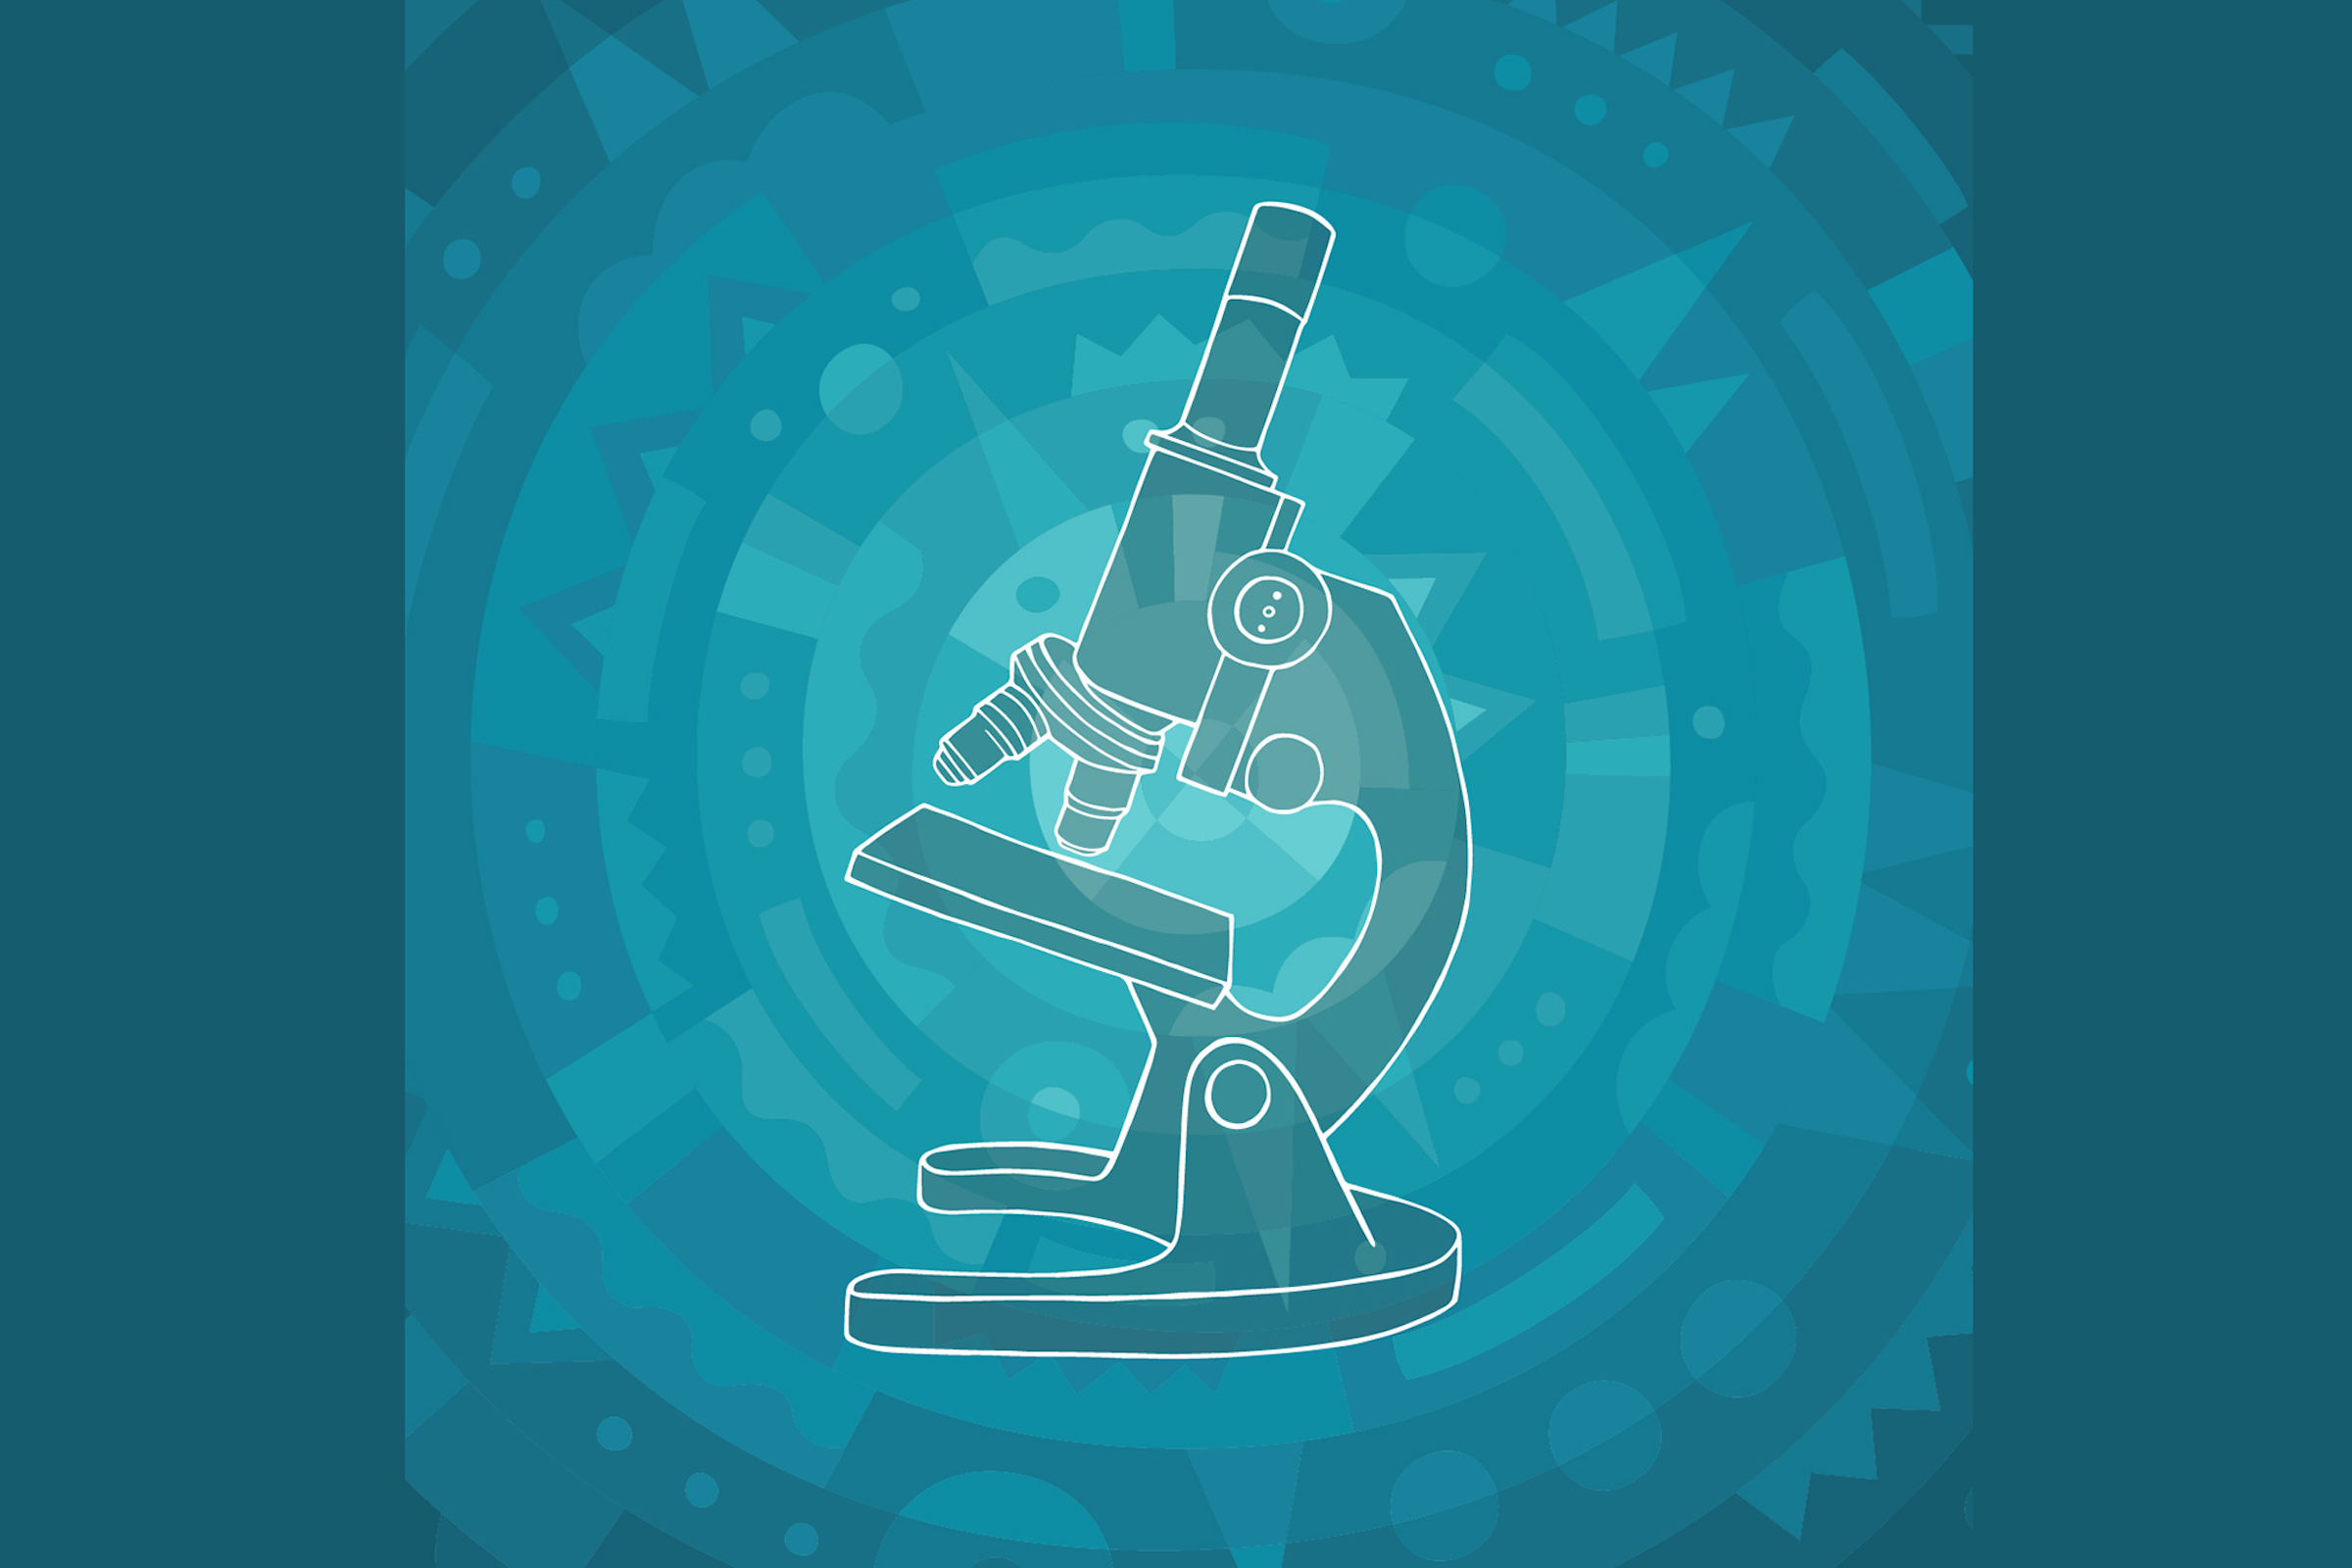 Logo consisting of a microscope in front of an abstract background